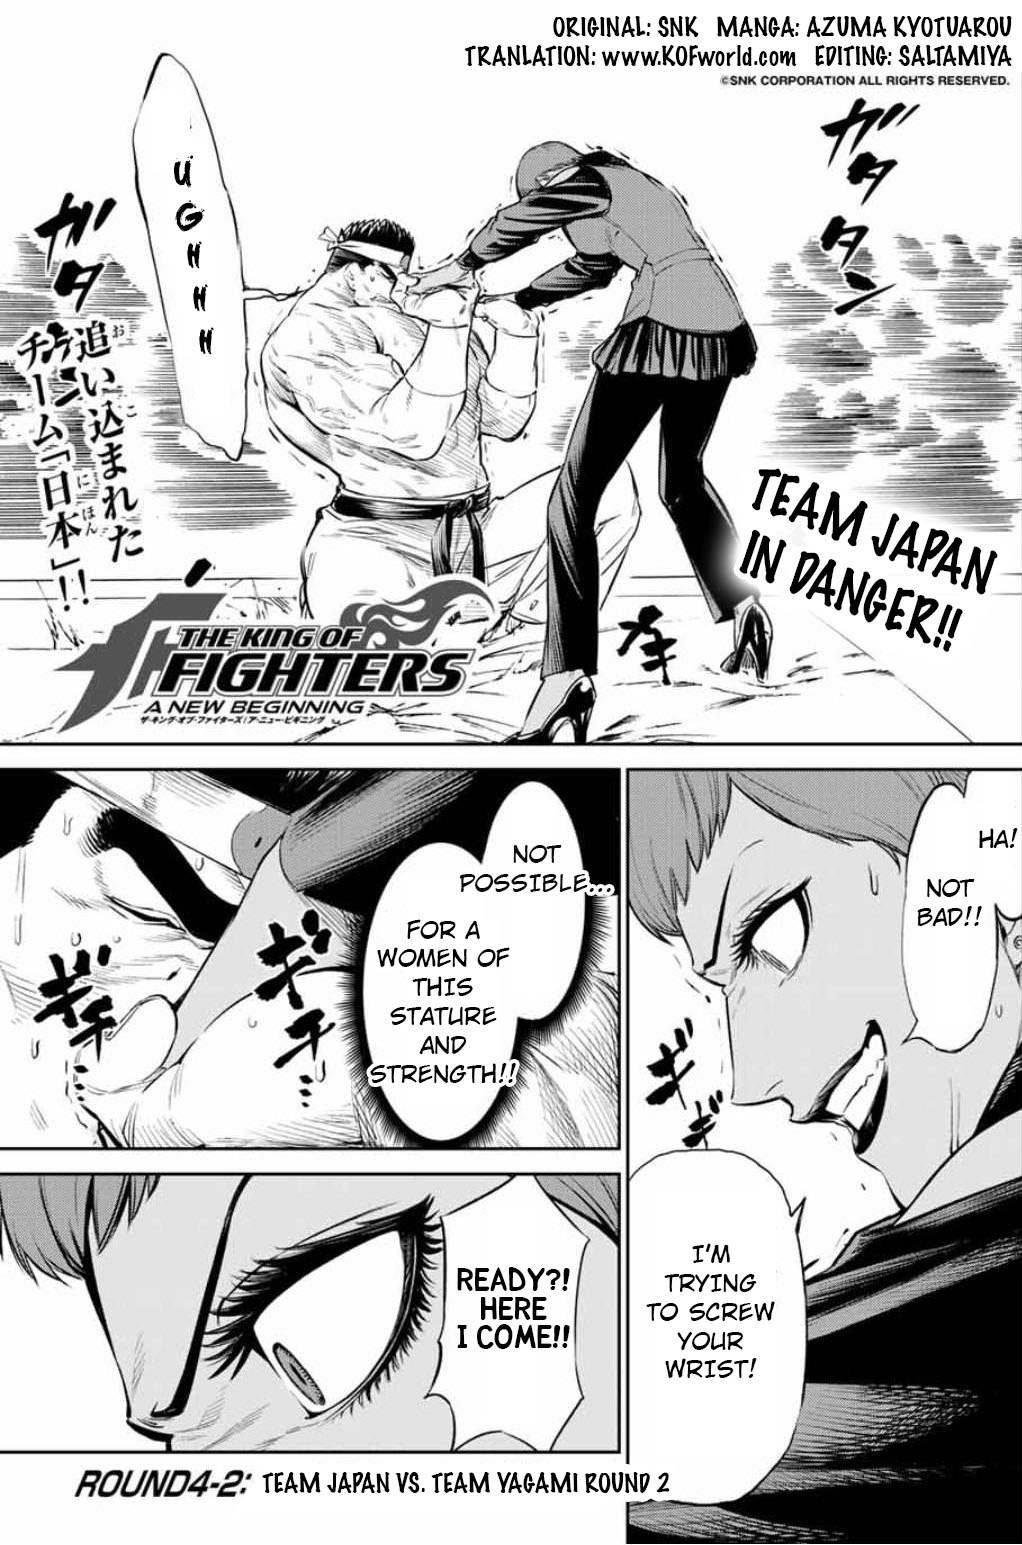 The King of Fighters: A New Beginning Vol. 1 Ch. 4.2 Team Japan vs Team Yagami 2nd